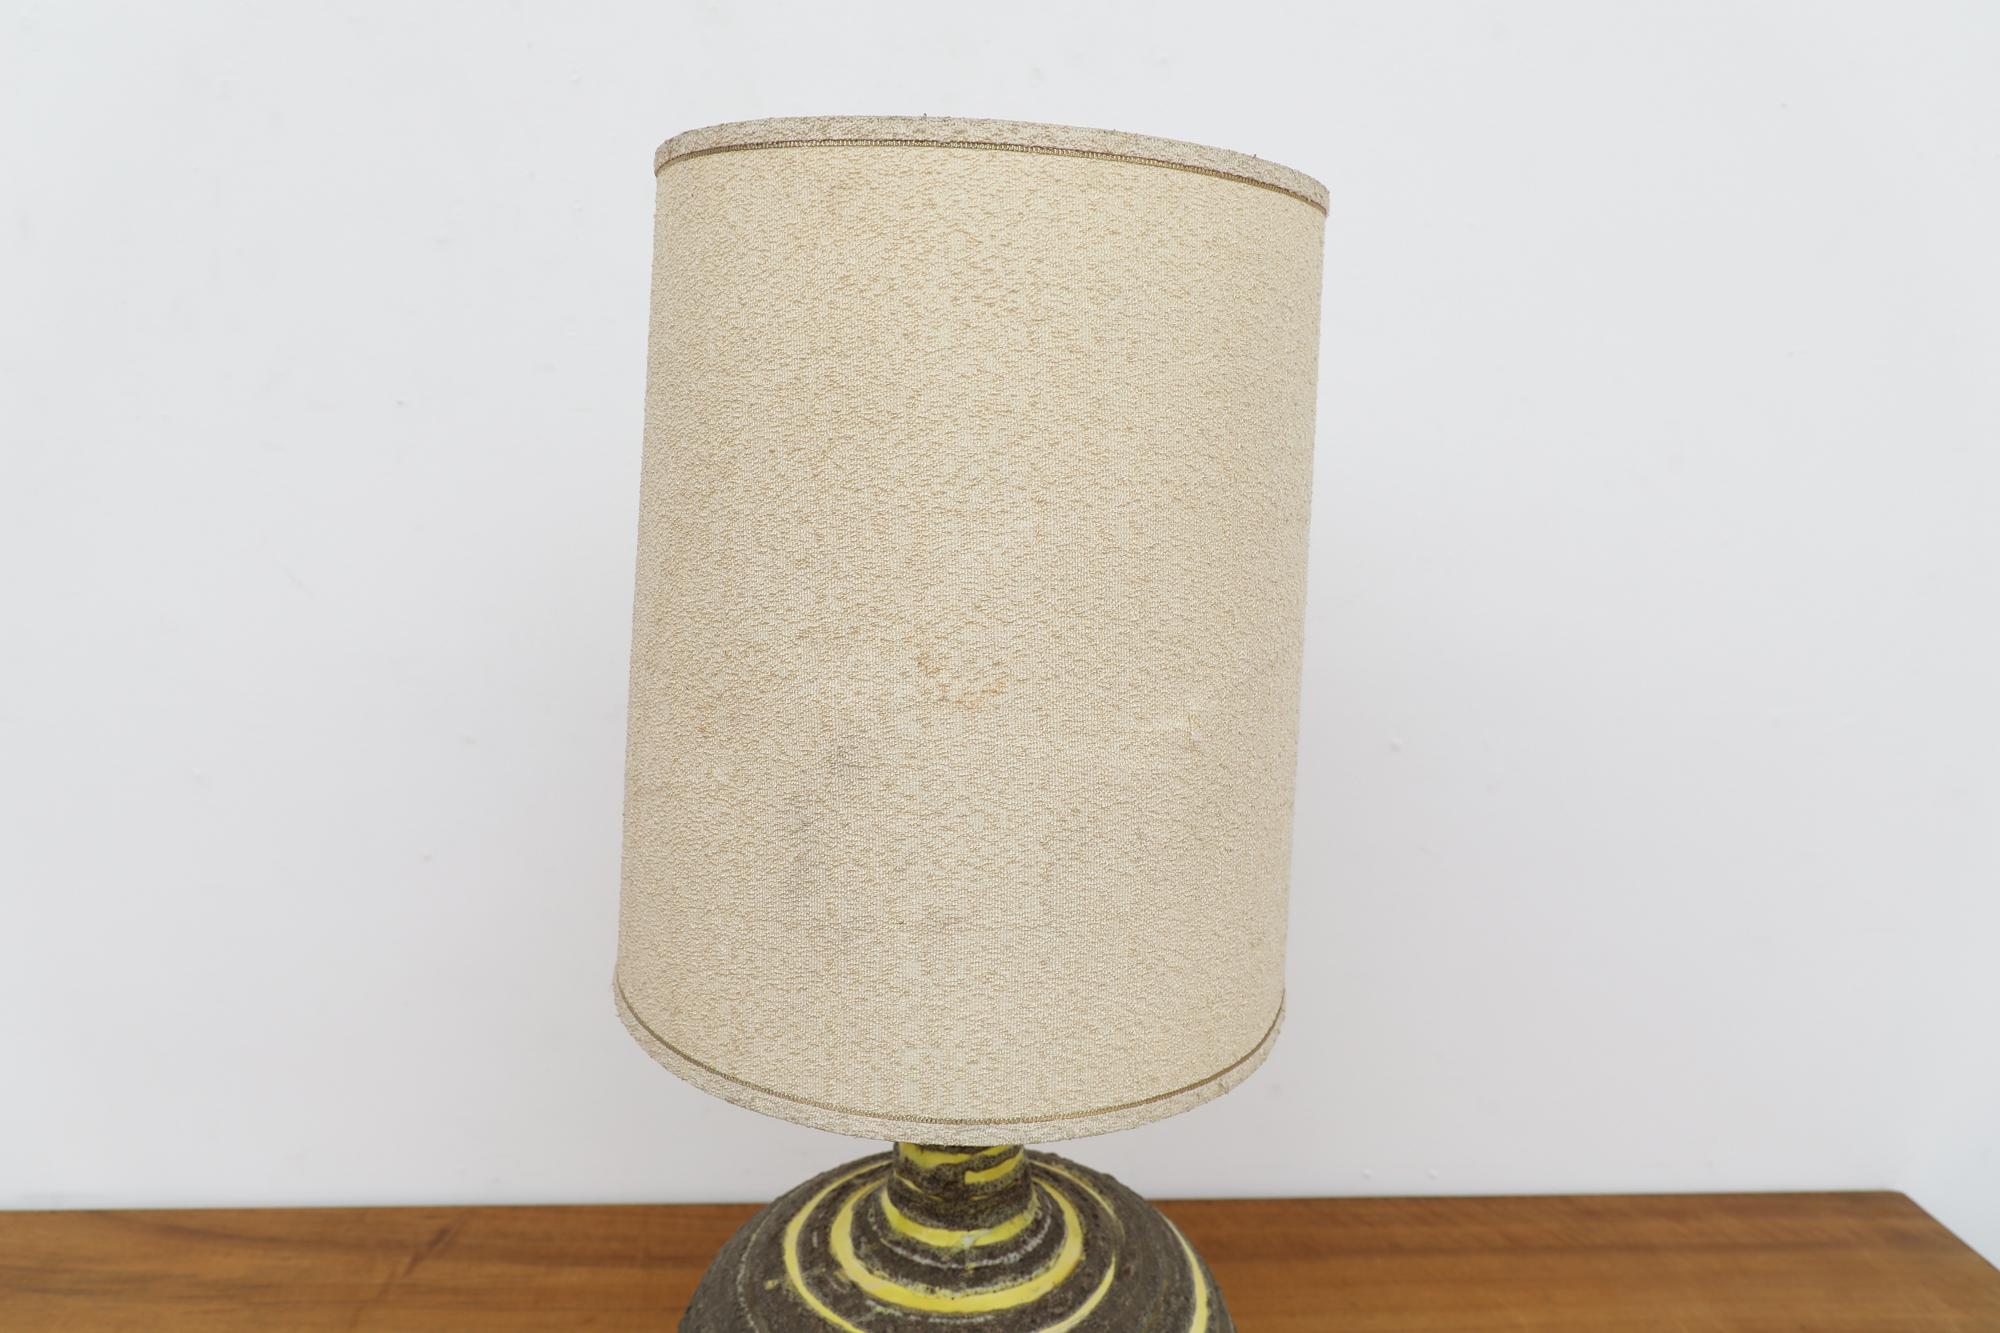 Large Mid-Century Yellow & Gray Swirled Lava Glazed Ceramic Table Lamp w/ Shade For Sale 2